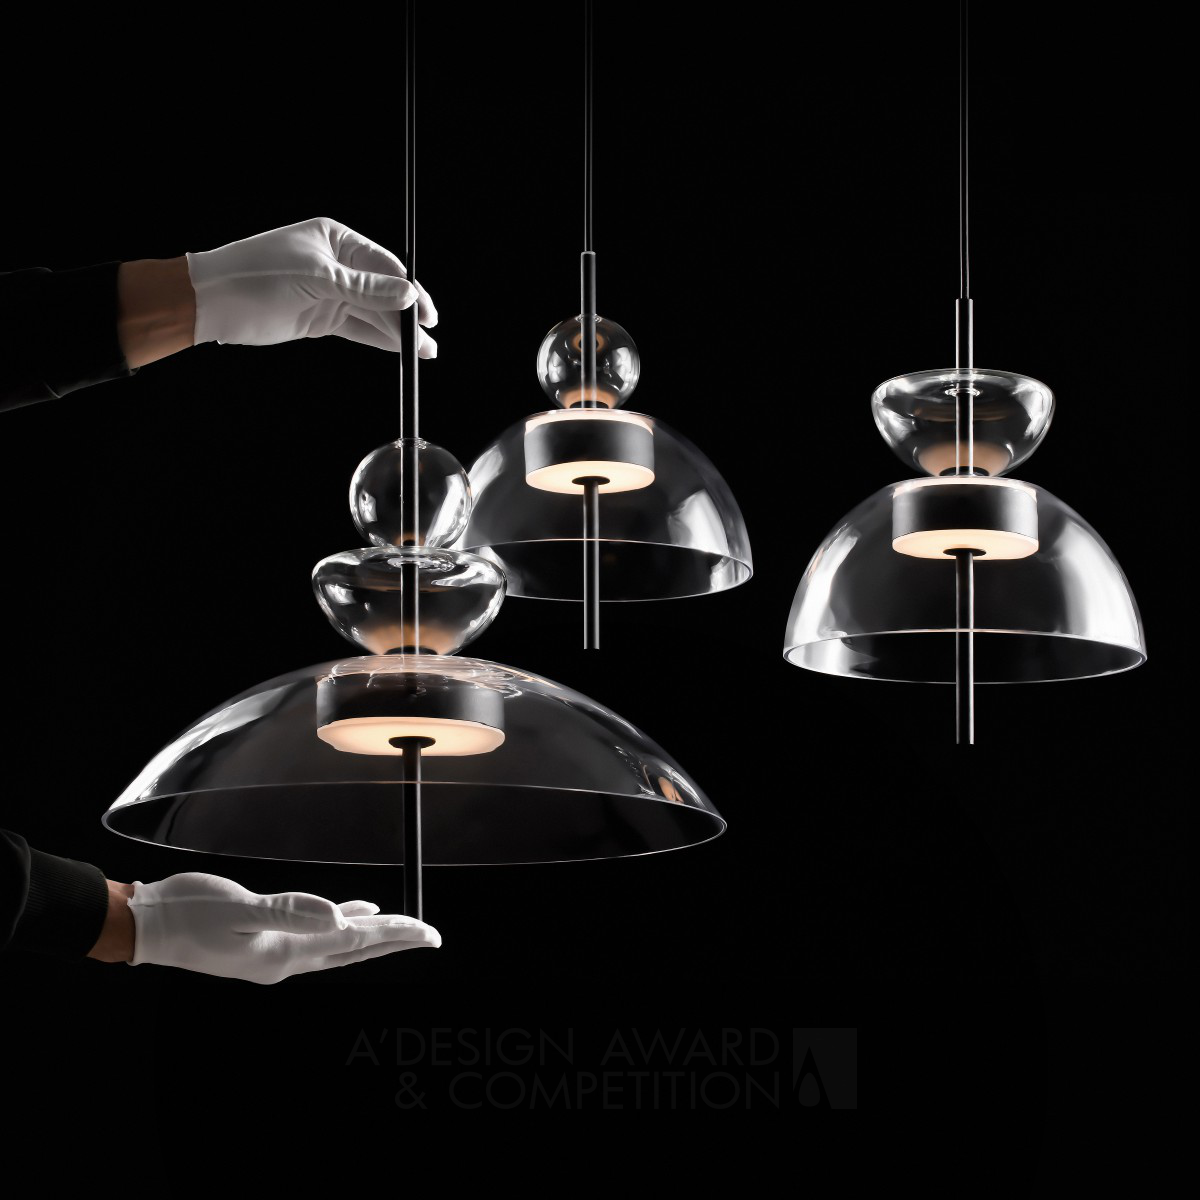 Alexey Danilin wins Golden at the prestigious A' Lighting Products and Fixtures Design Award with Bangkok Pendant Lamp.